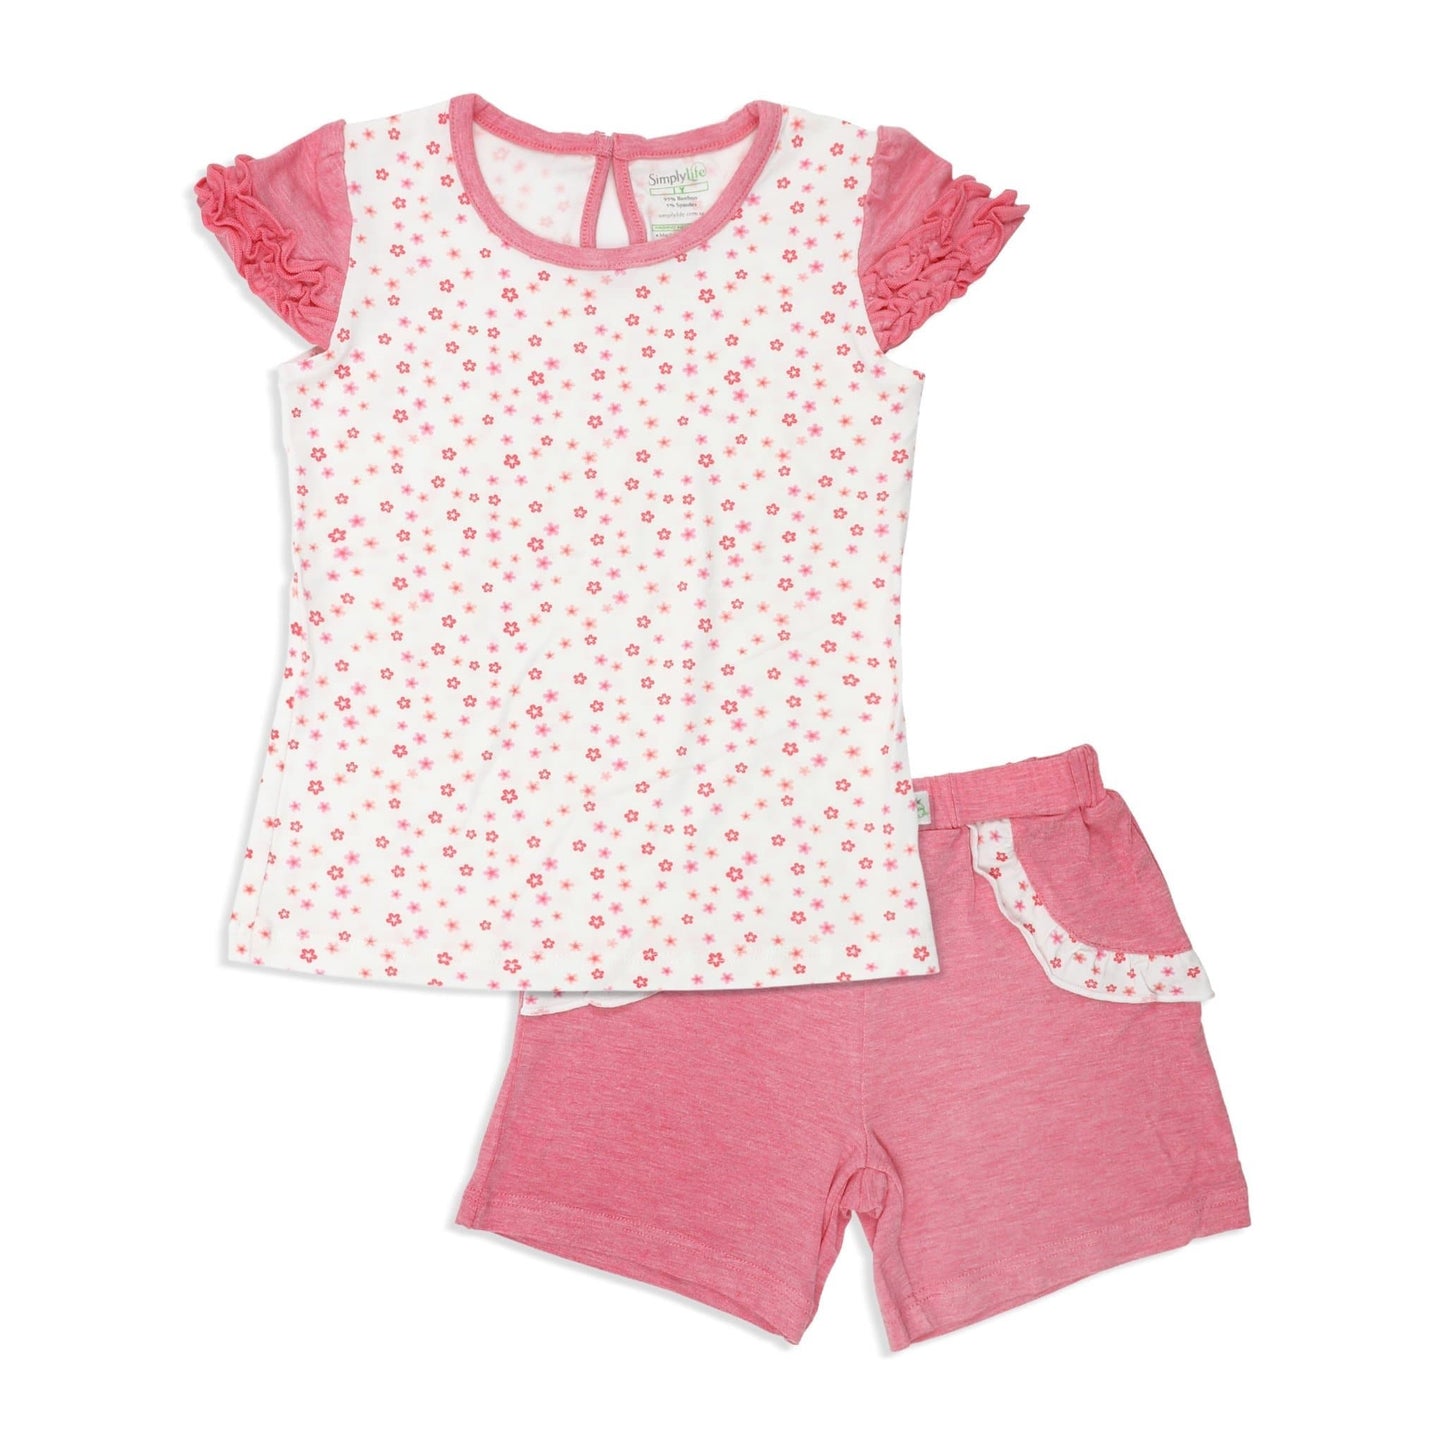 Floral - Short-sleeved Tee with Ruffles & Shorts with Frills (mocked pocket) Kids Set - Simply Life